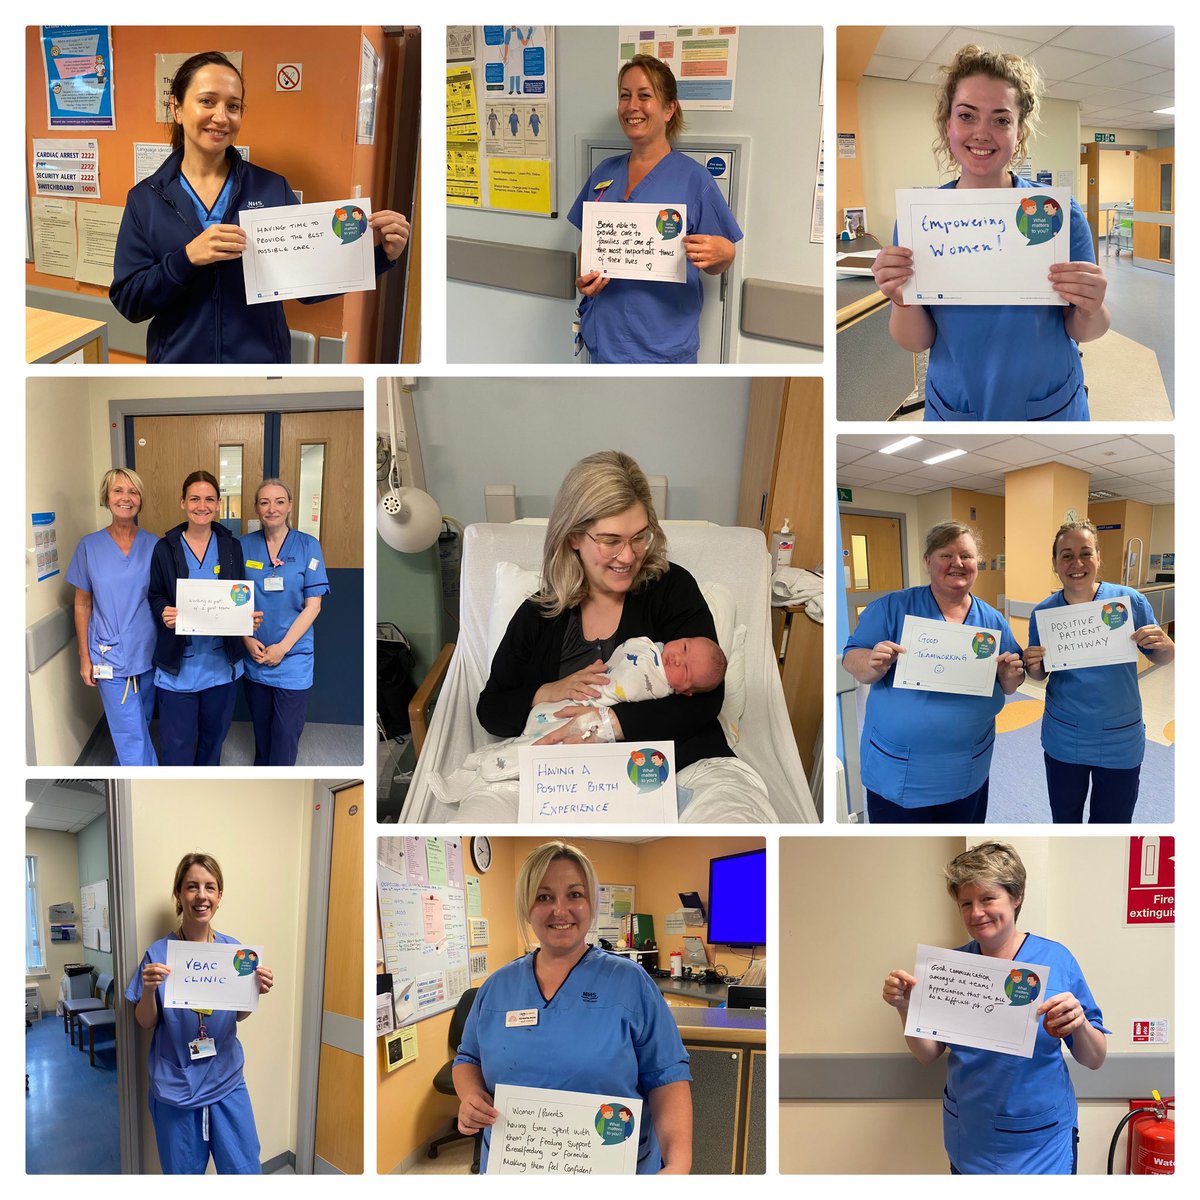 Great conversations with staff today with @NicOBrien1101 but also with those at the heart of what we do…women and their families. Thanks to them all. 💙
#WMTY23 #NHSGGC 
@MaryRossDavie @redfernjam